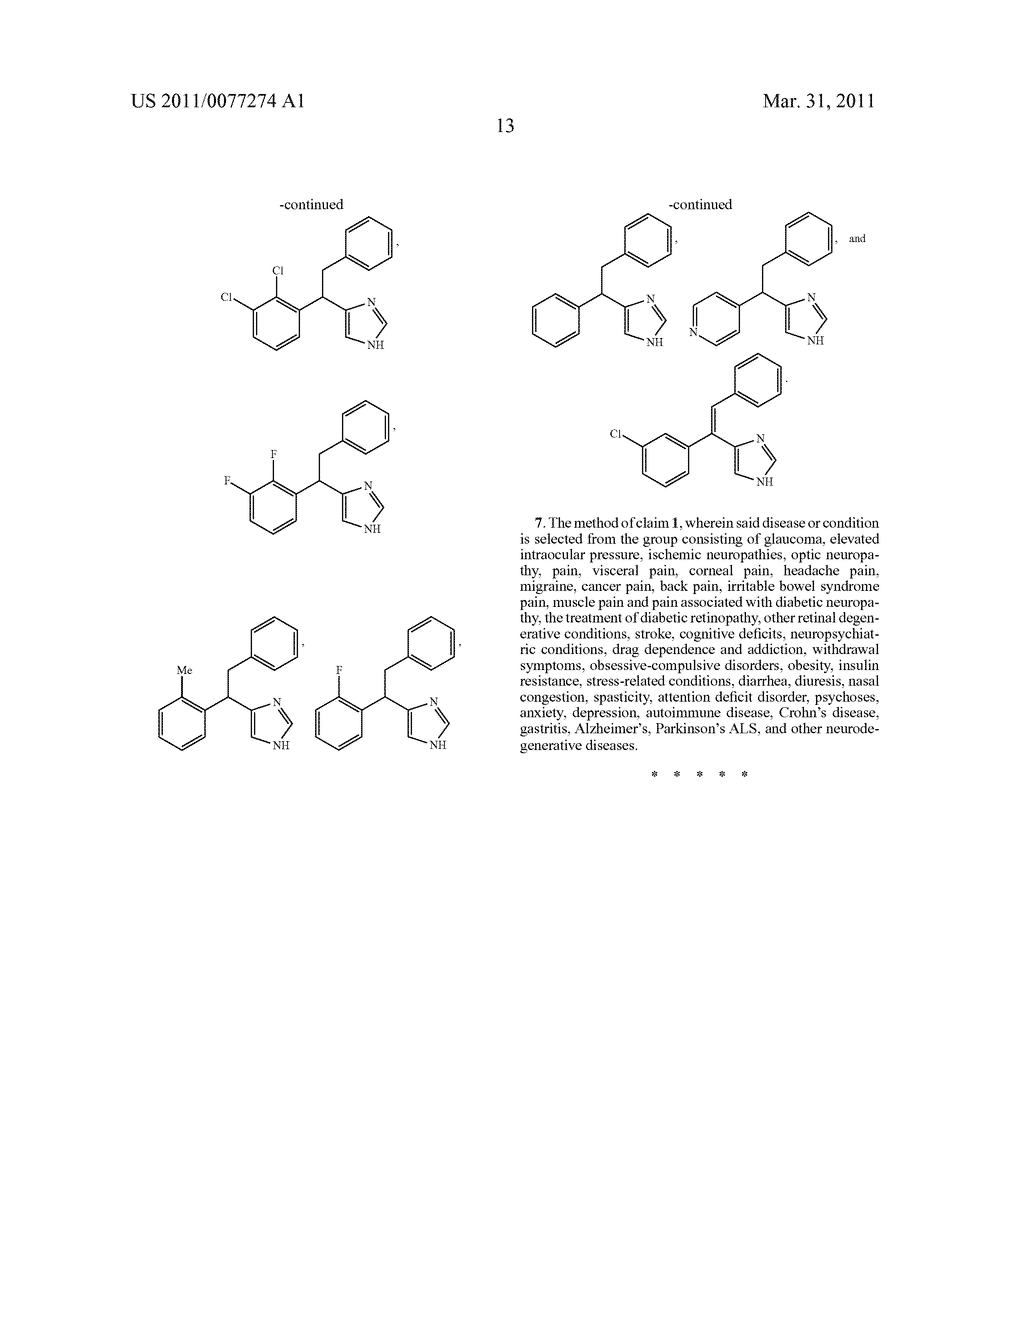 SUBSTITUTED-ARYL-2-PHENYLETHYL-1H-IMIDAZOLE COMPOUNDS AS SUBTYPE SELECTIVE MODULATORS OF ALPHA 2B AND/OR ALPHA 2C ADRENERGIC RECEPTORS - diagram, schematic, and image 14